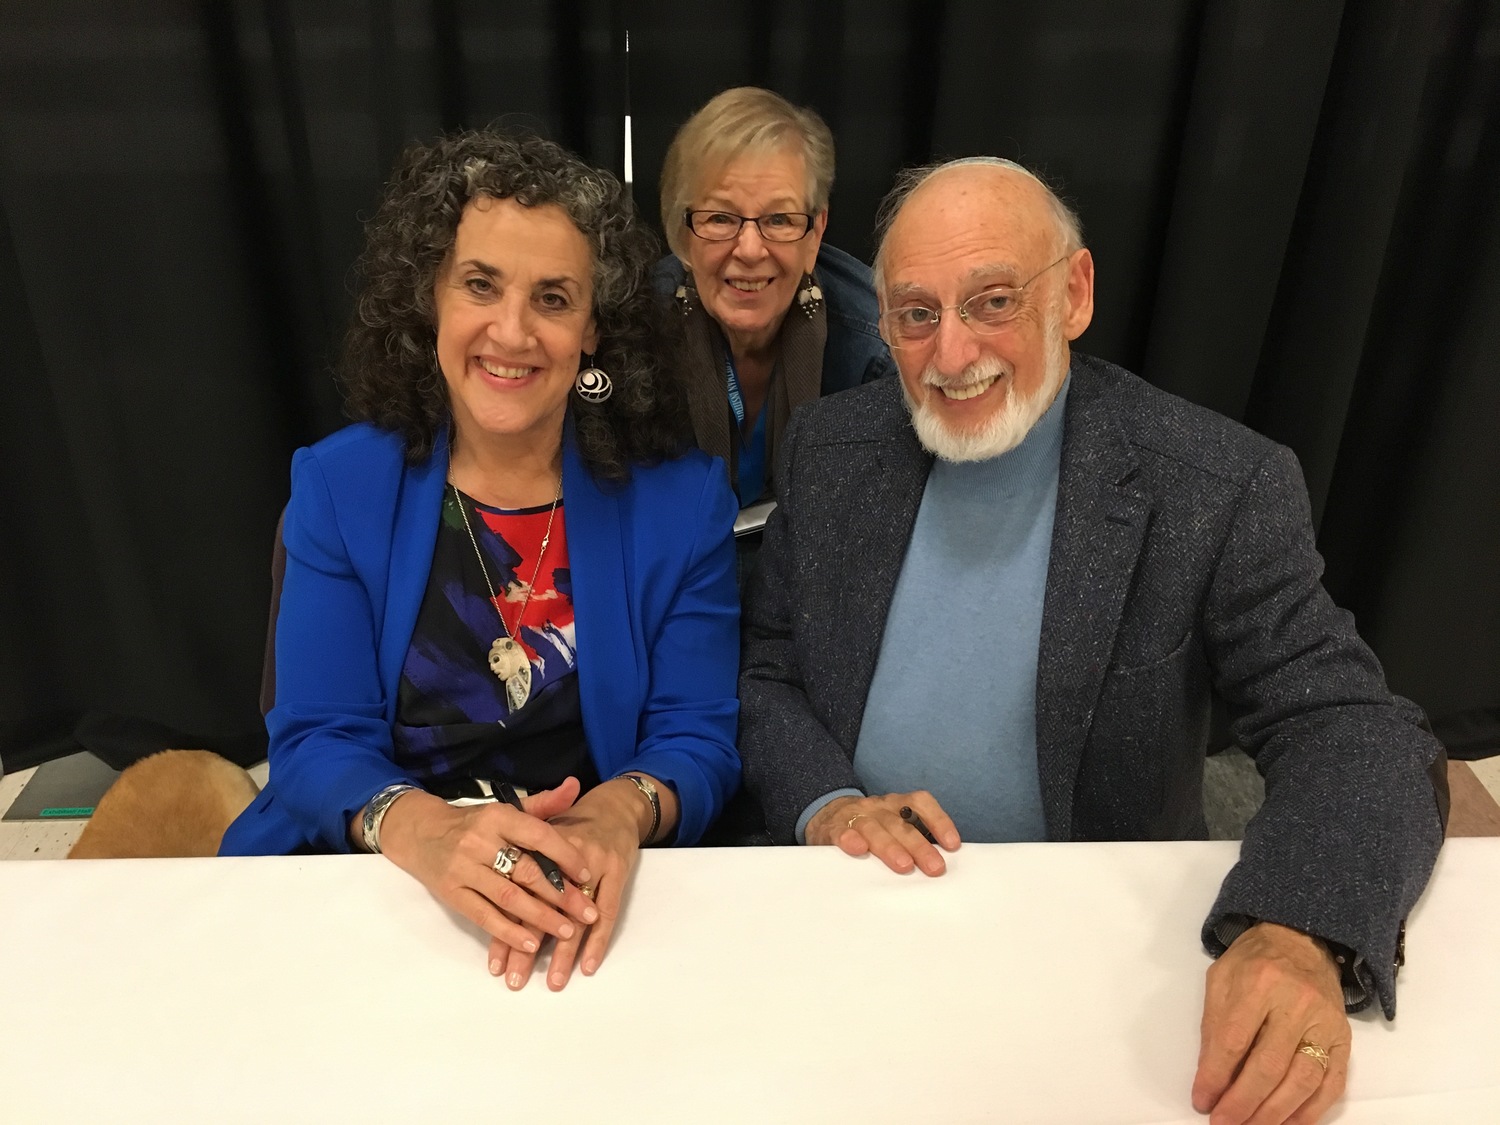 Gallery Photo of Ilana with Drs. John and Julie Gottman of the Gottman Institute